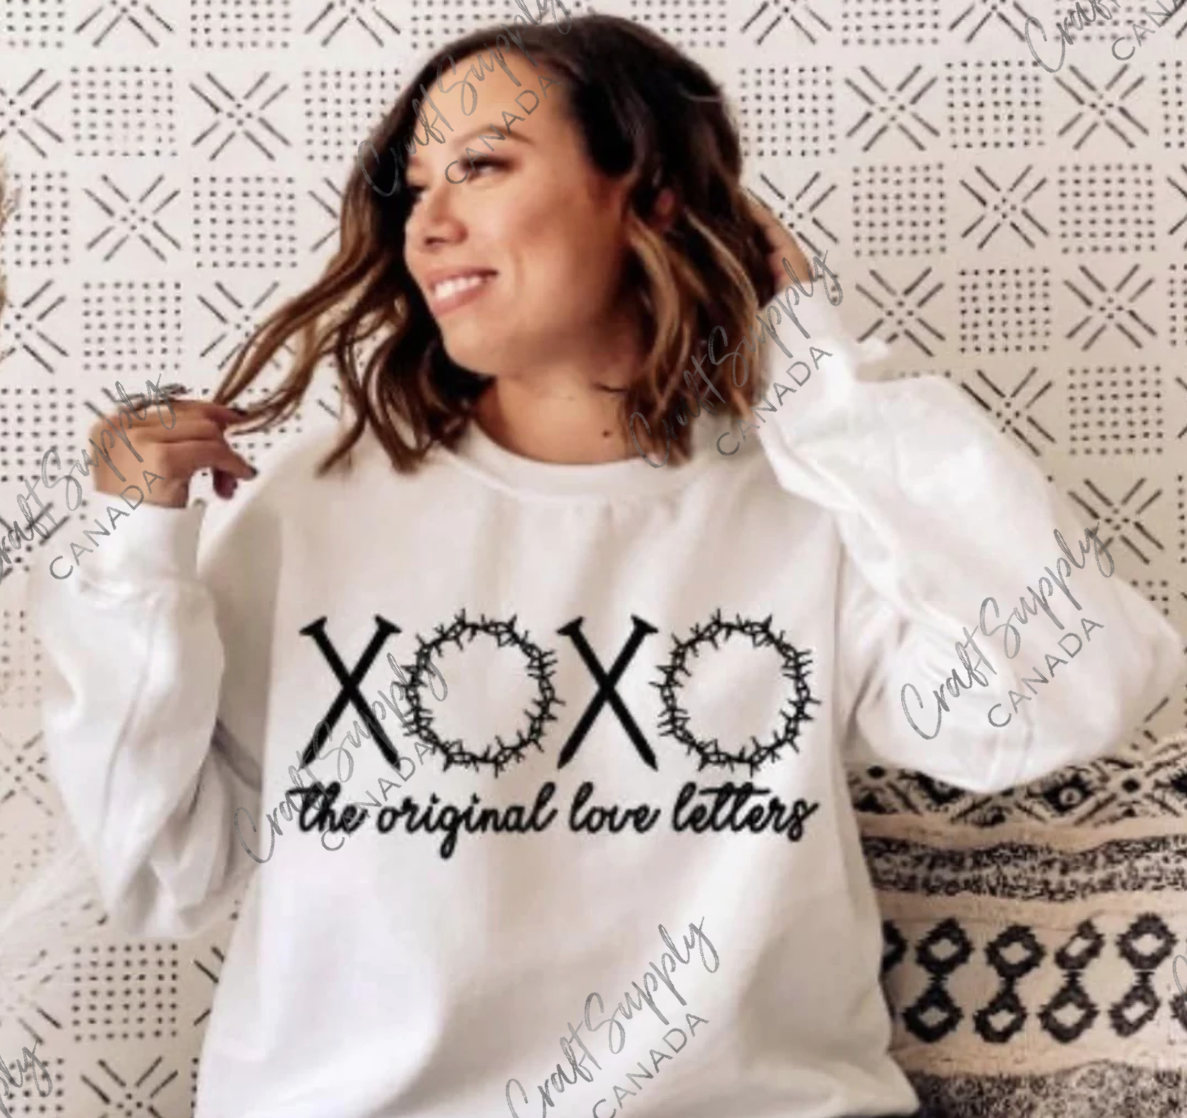 Screen Print - XOXO/Original Love Letters - Adult (see description for size and press info)